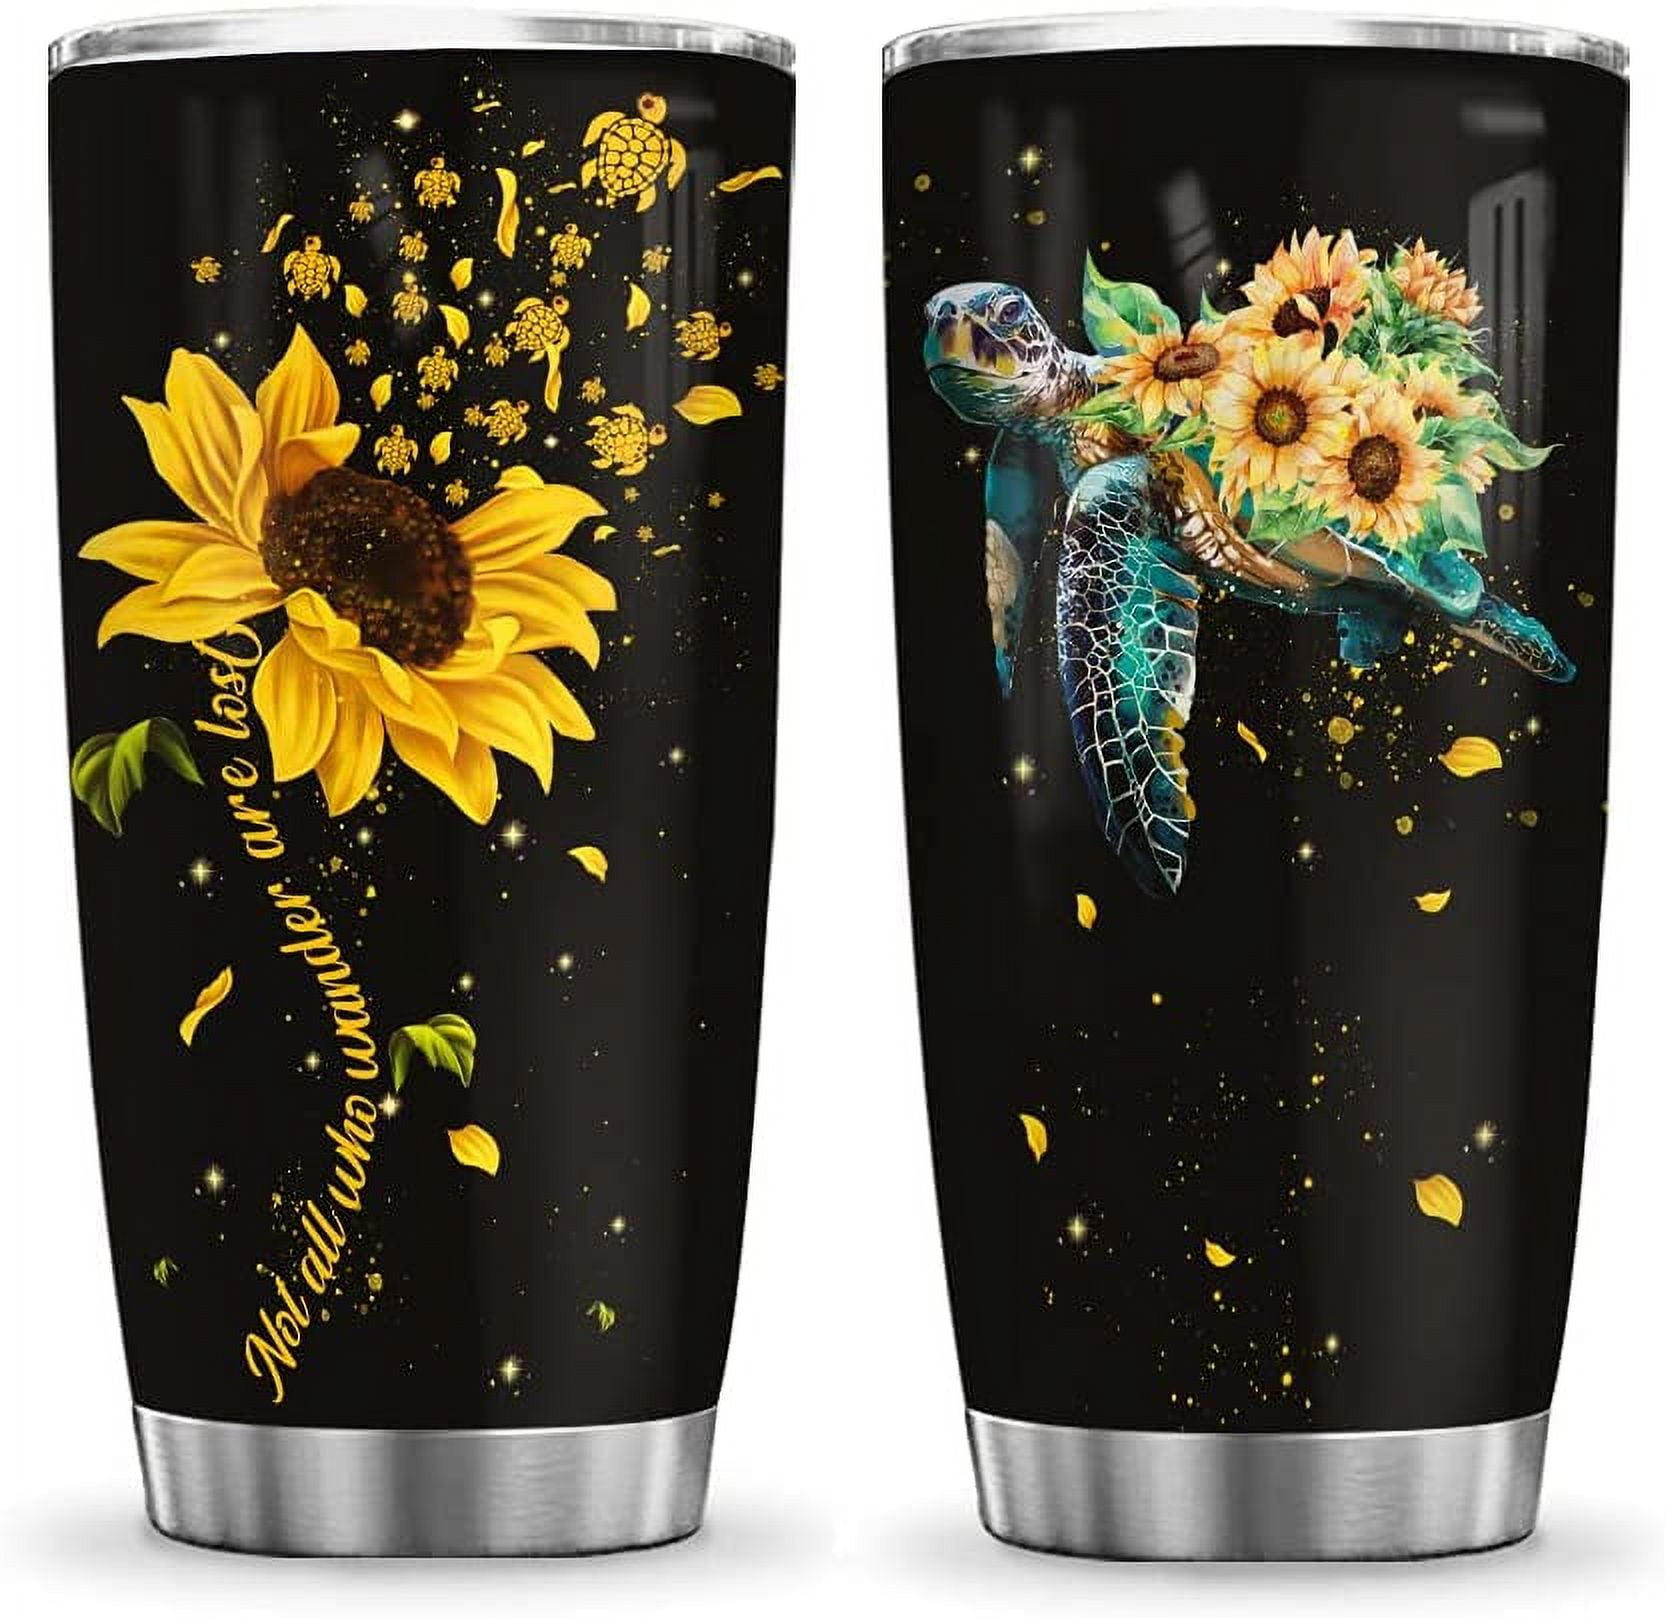 Tropical Leaves Tumbler Cup with Handle – Briarwood Gifts